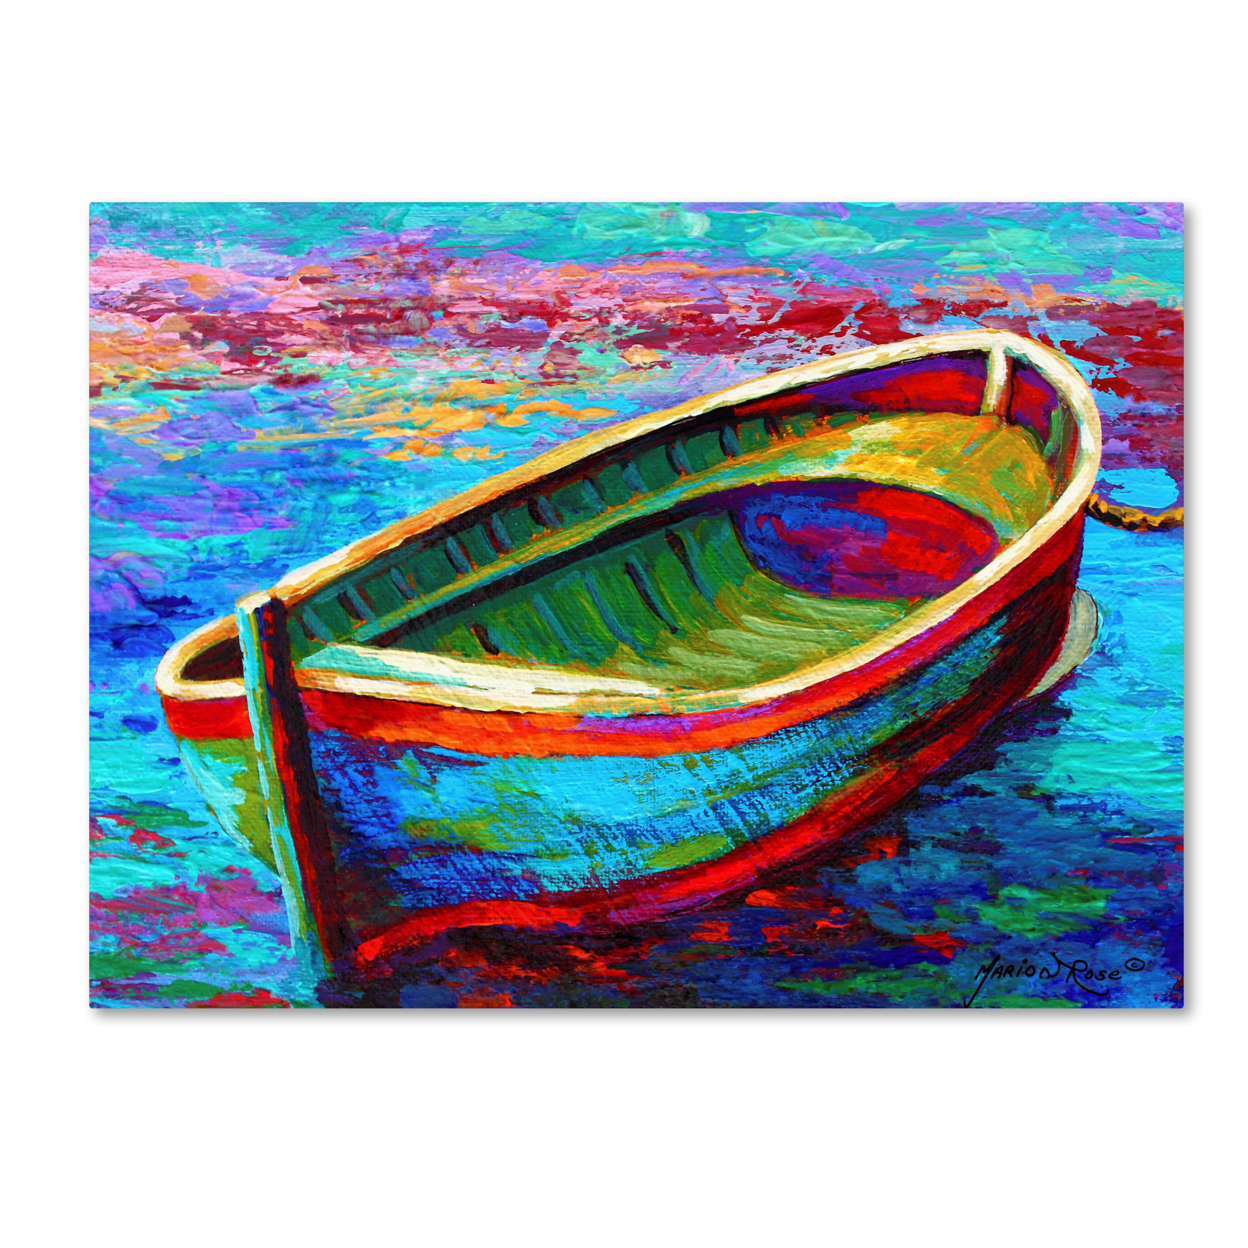 Marion Rose 'Boat 9' Ready To Hang Canvas Art 24 X 32 Inches Made In USA